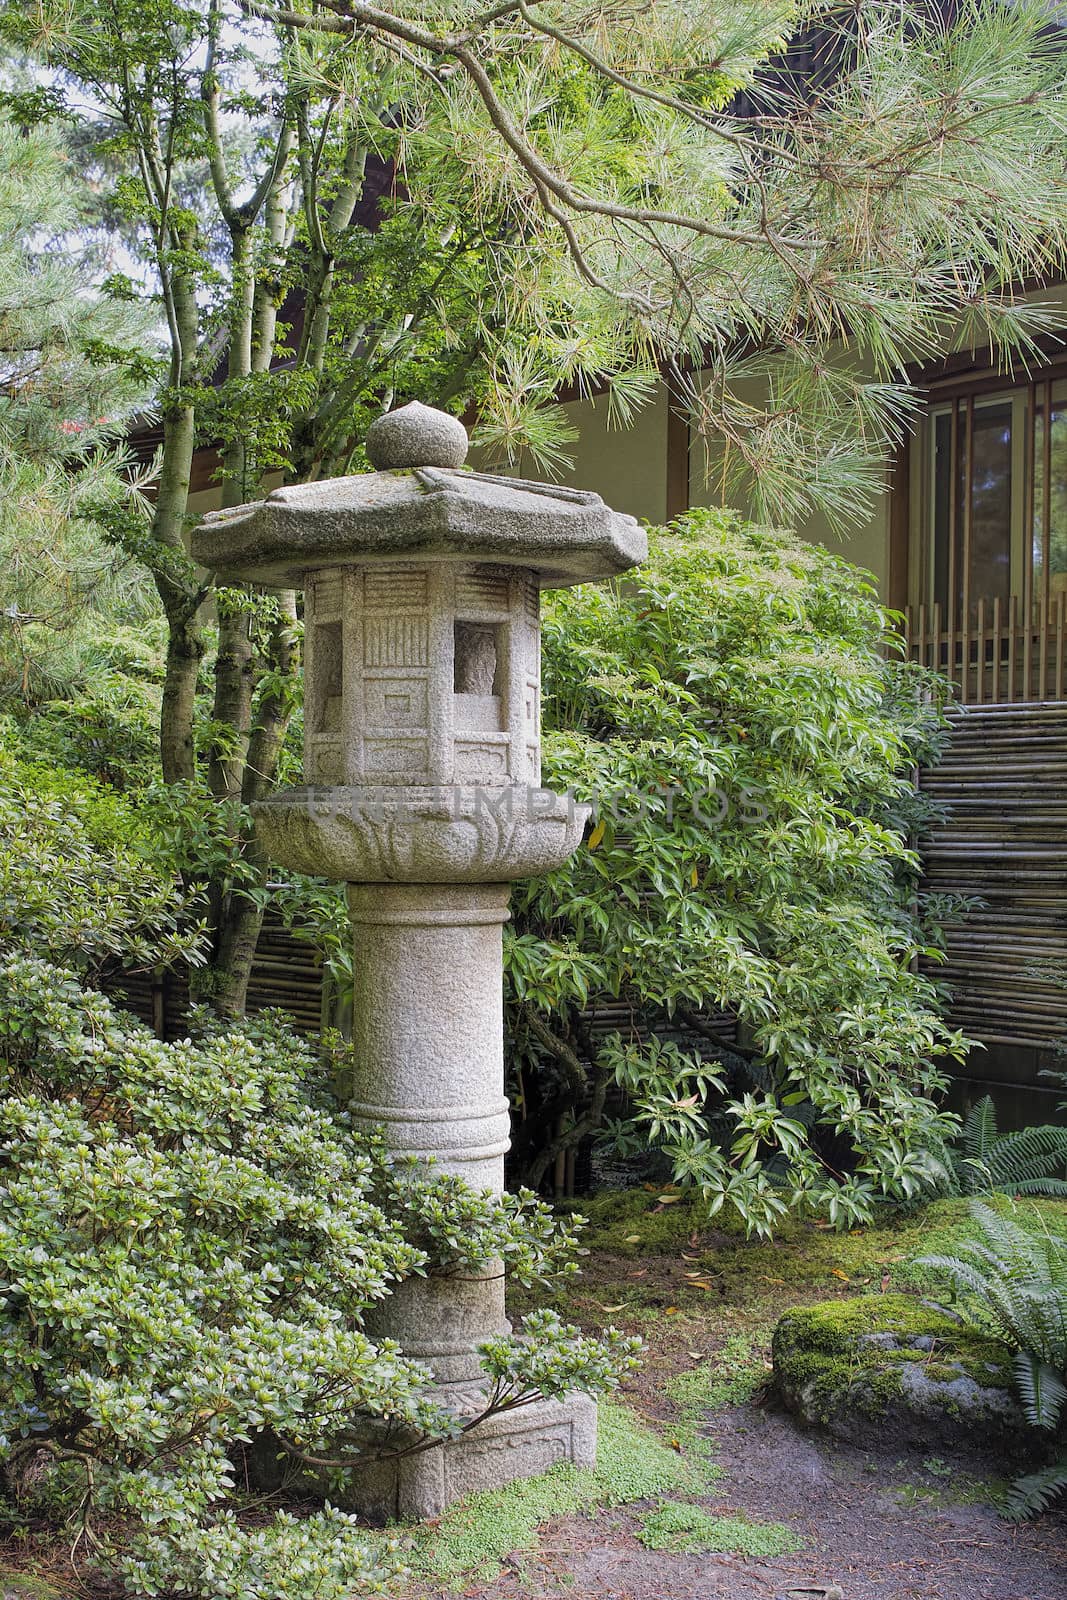 Japanese Stone Lantern in Garden with Trees Plants and Shrubs during Fall Season